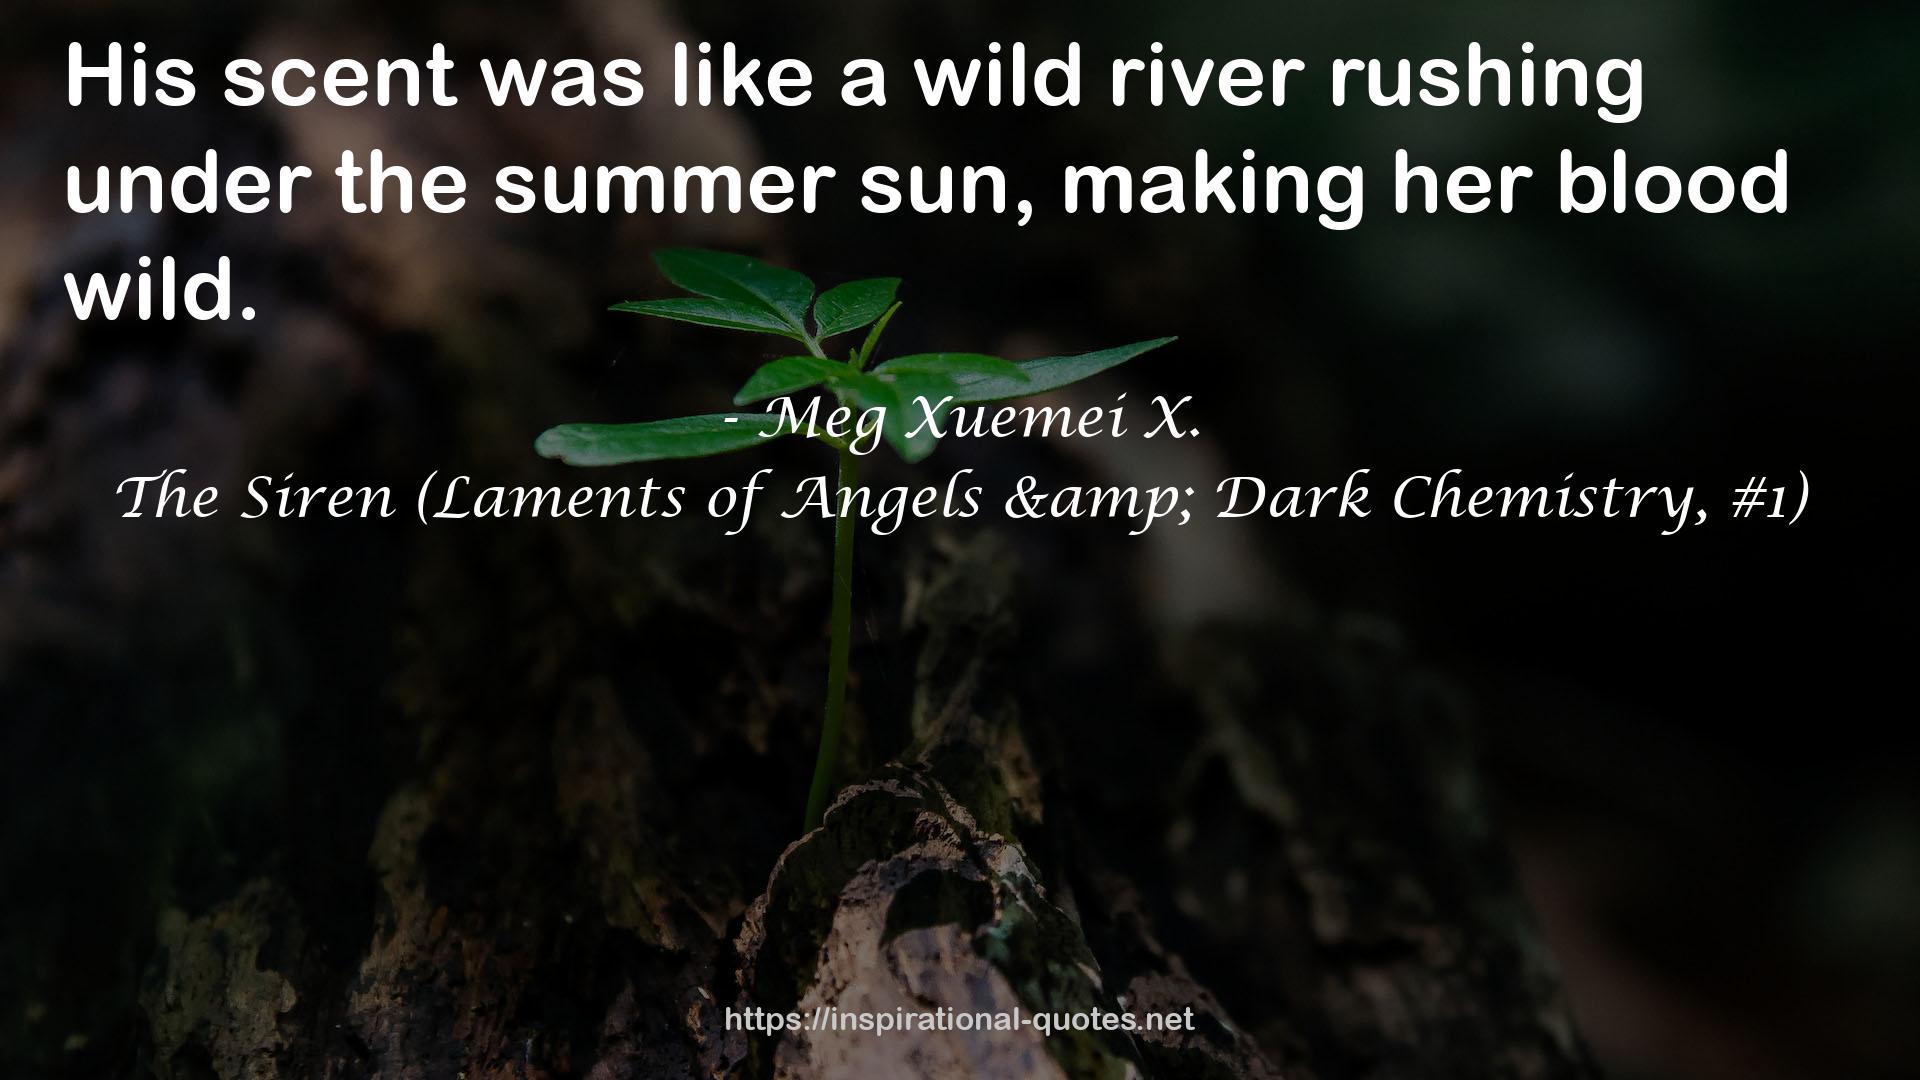 The Siren (Laments of Angels & Dark Chemistry, #1) QUOTES